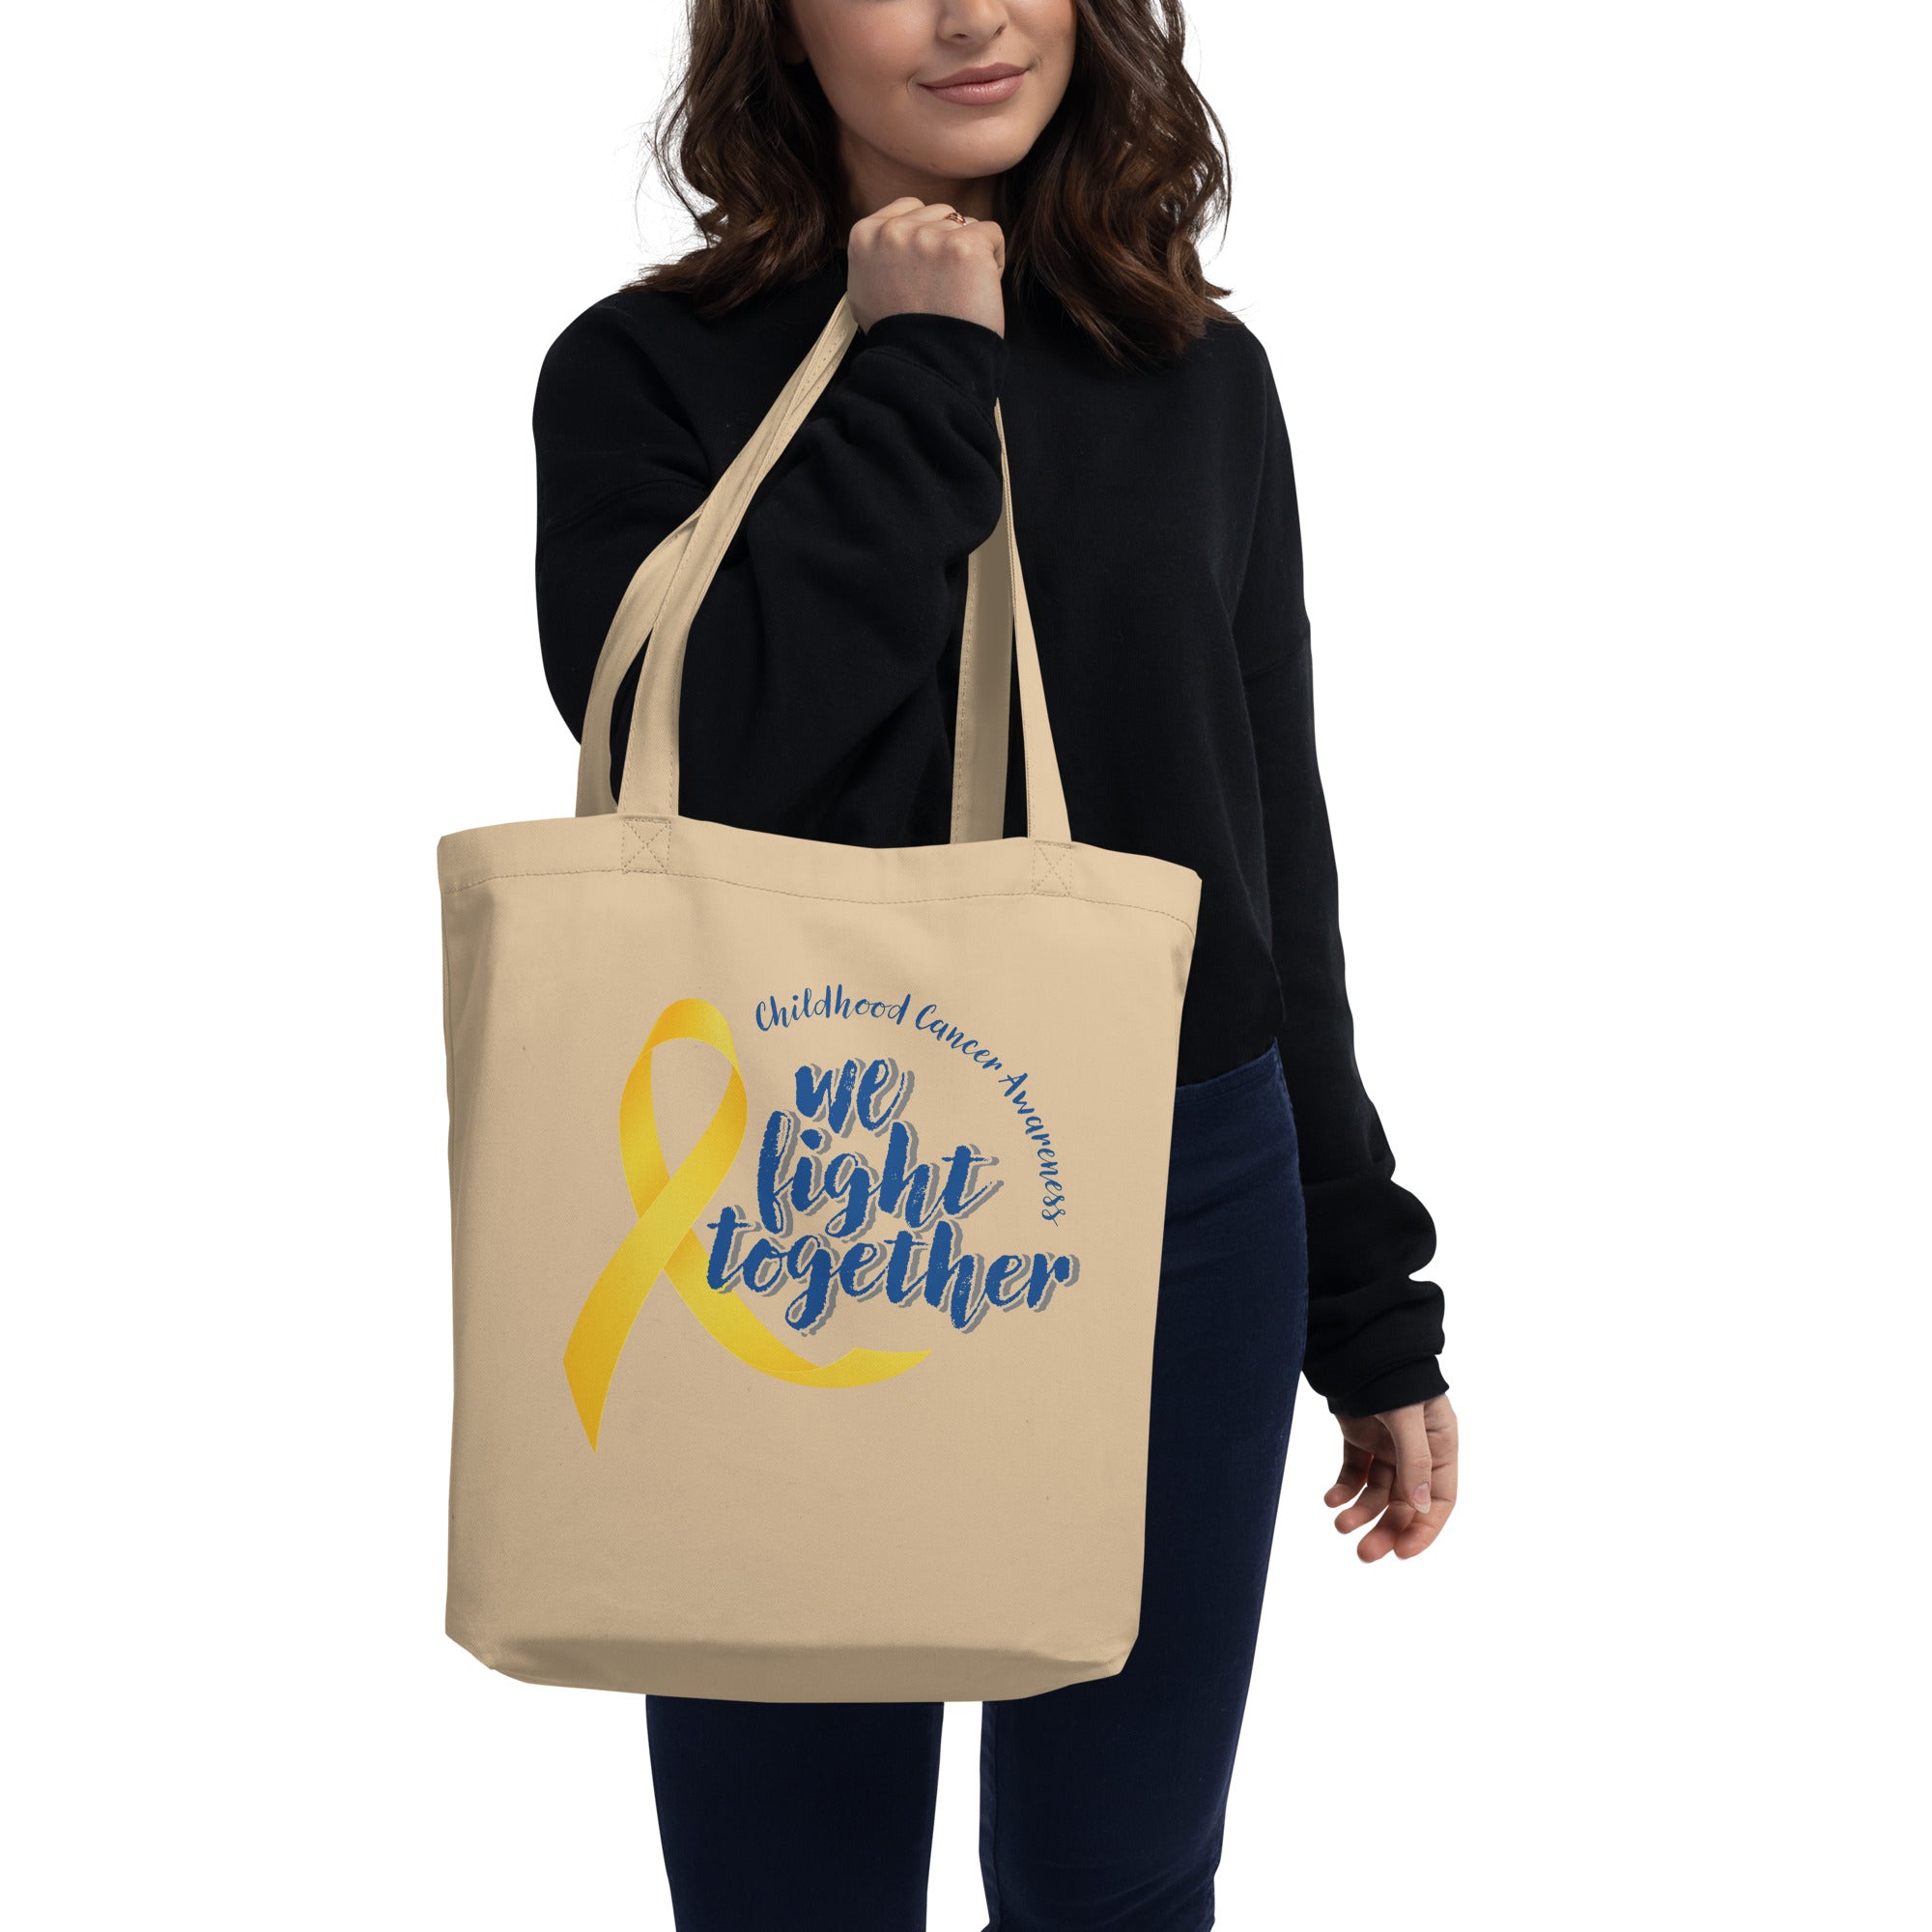 We Fight Together - Eco Tote Bag